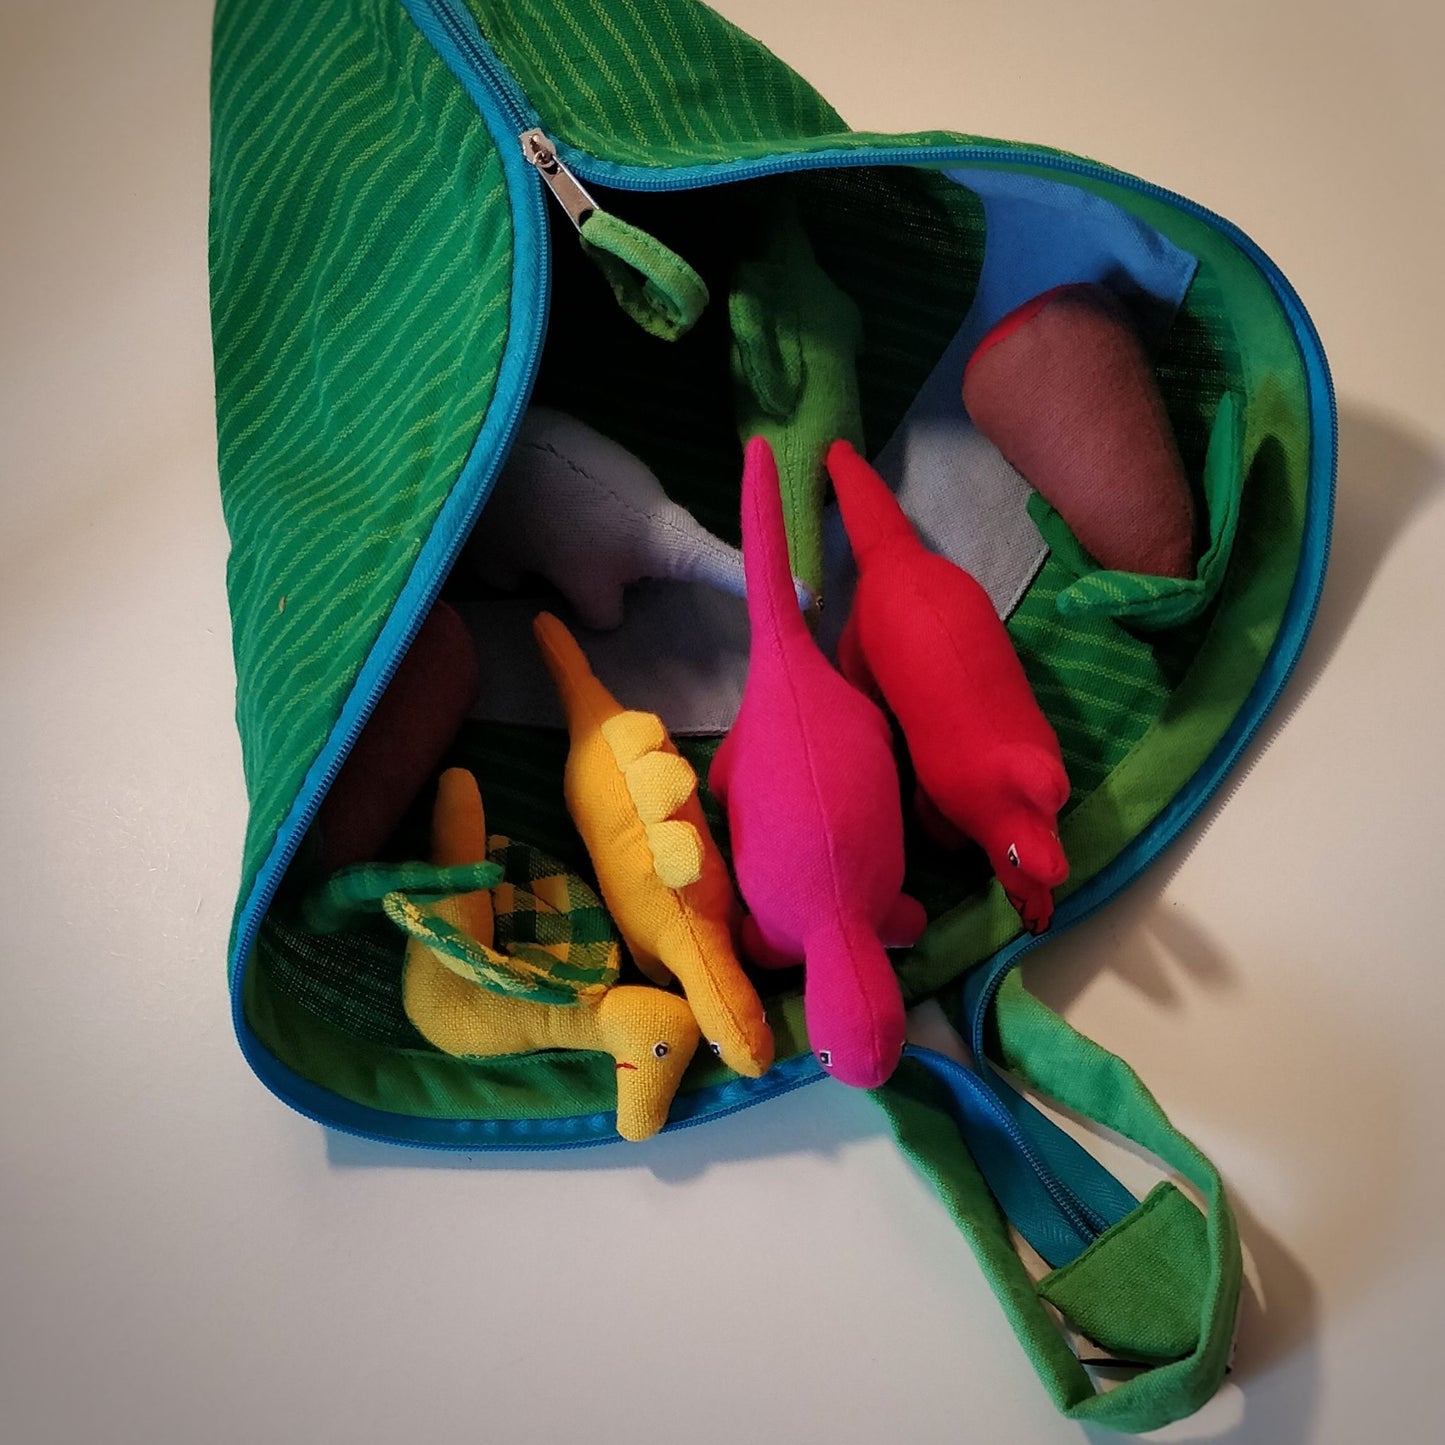 Dinosaur cotton toy play pouch - toy pouch half zipped